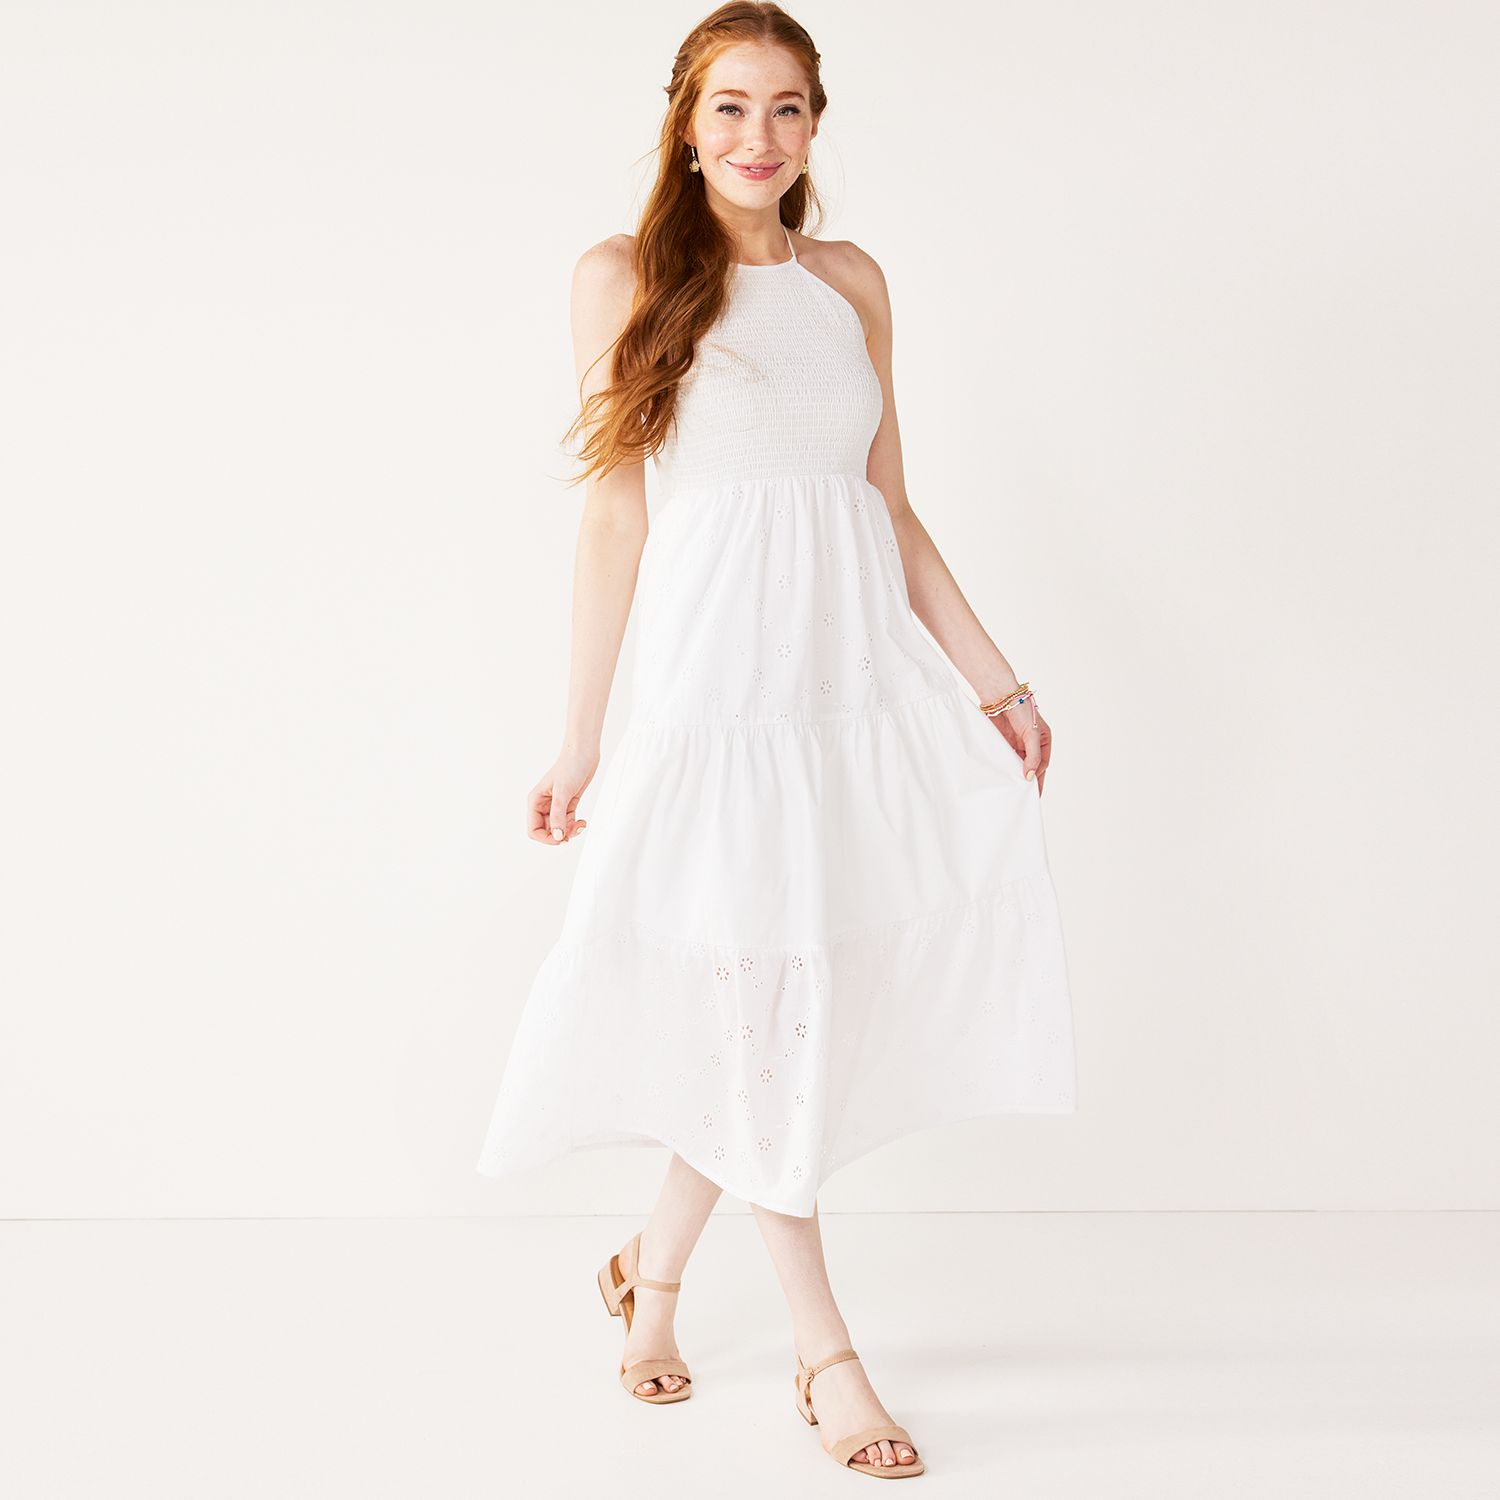 Juniors Easter Dresses: Hop to it and ...